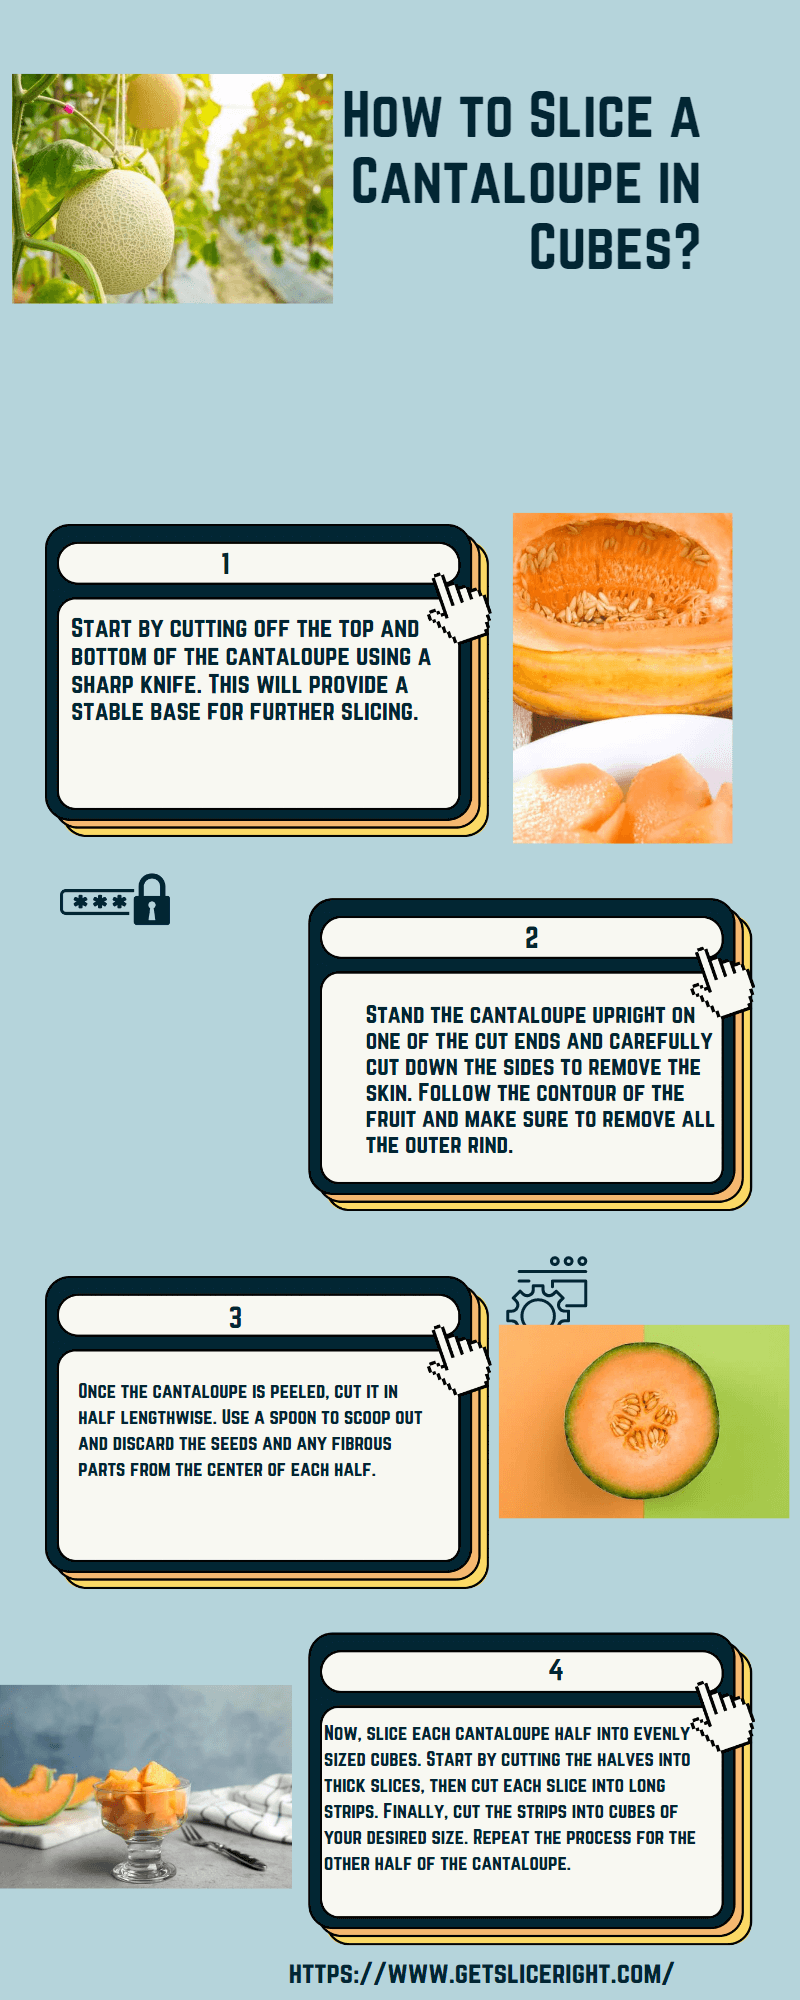 How to slice a cantaloupe in cubes - Getsliceright Infographic